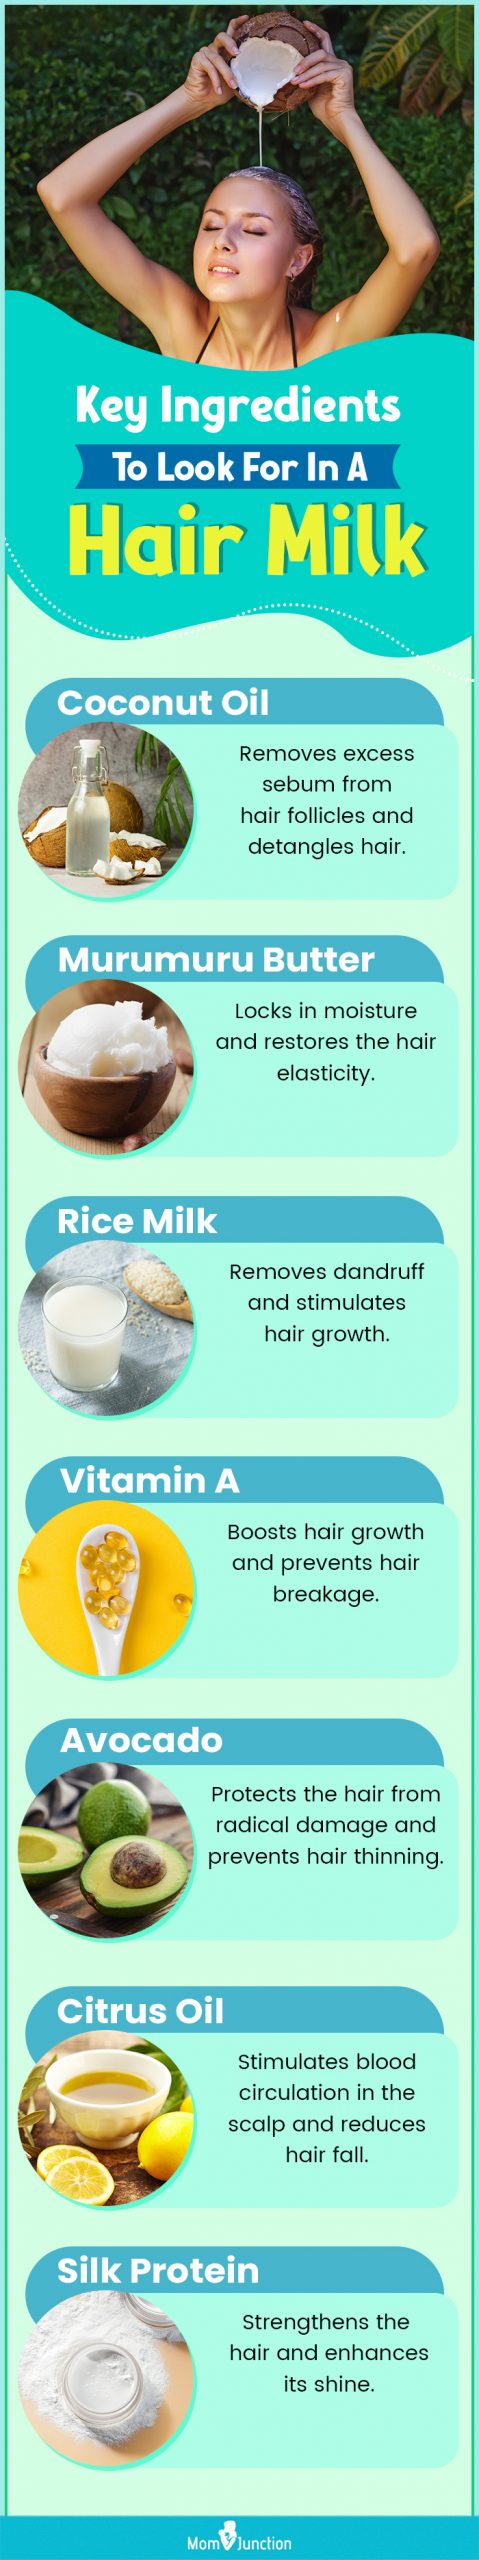 Key Ingredients To Look For In A Hair Milk (infographic)